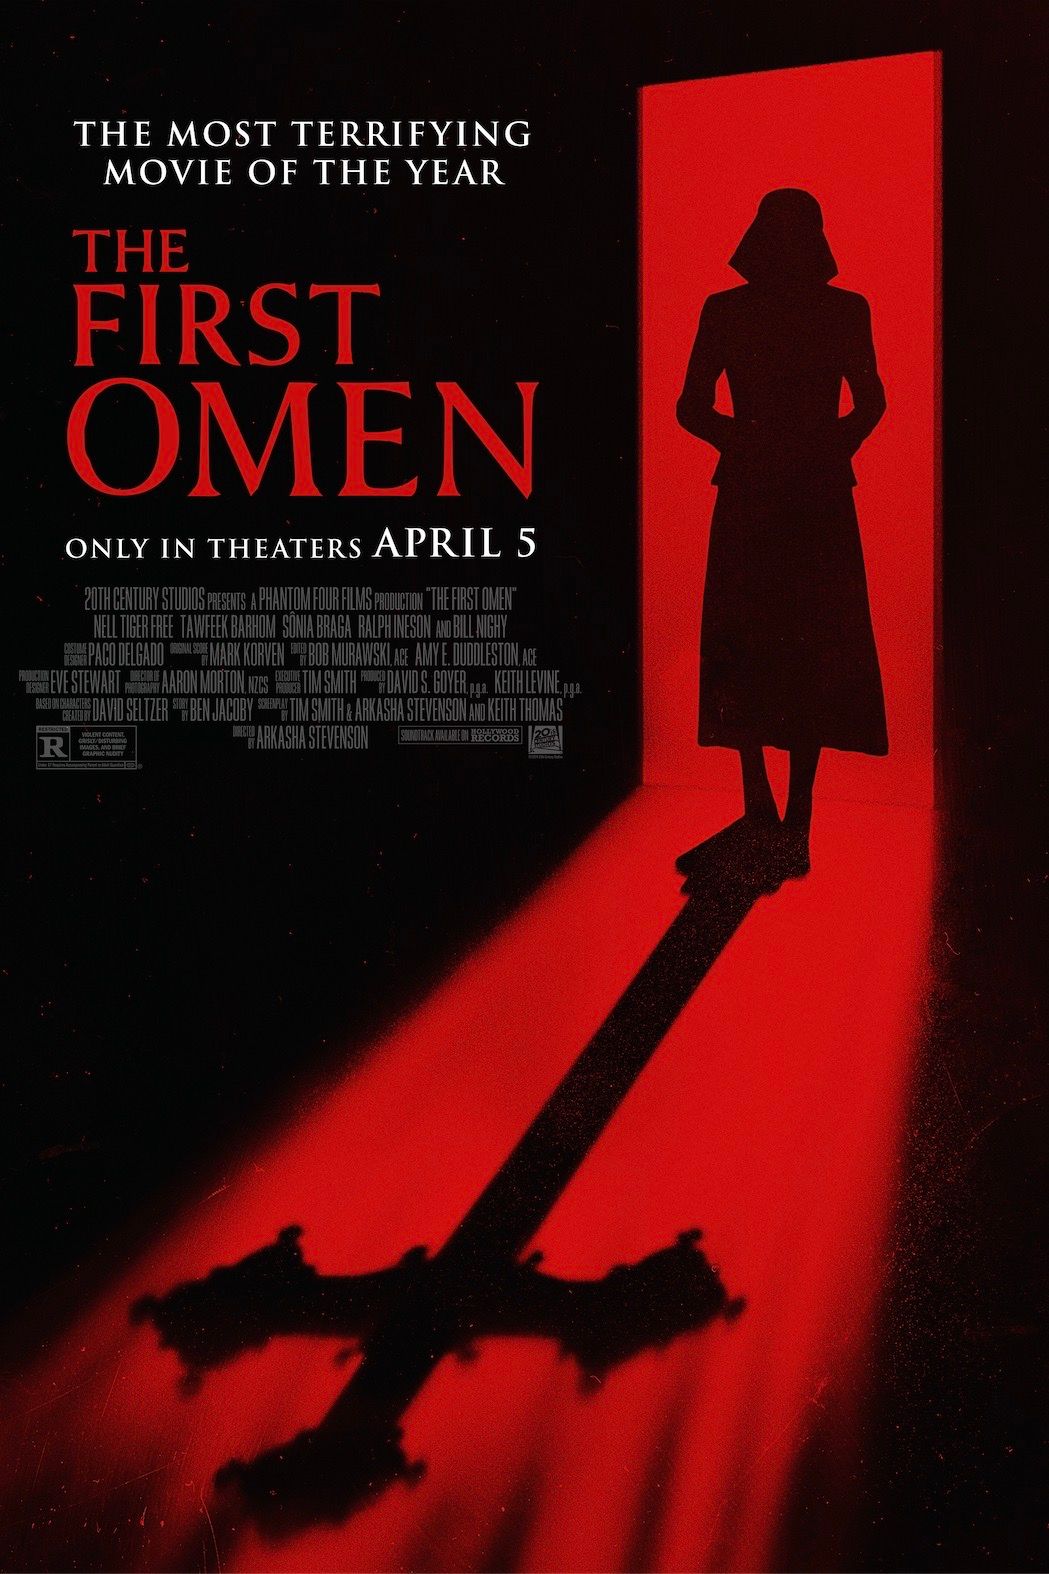 The First Omen Review: Horror Prequel Criticizes Church Corruption In Effective Franchise Entry